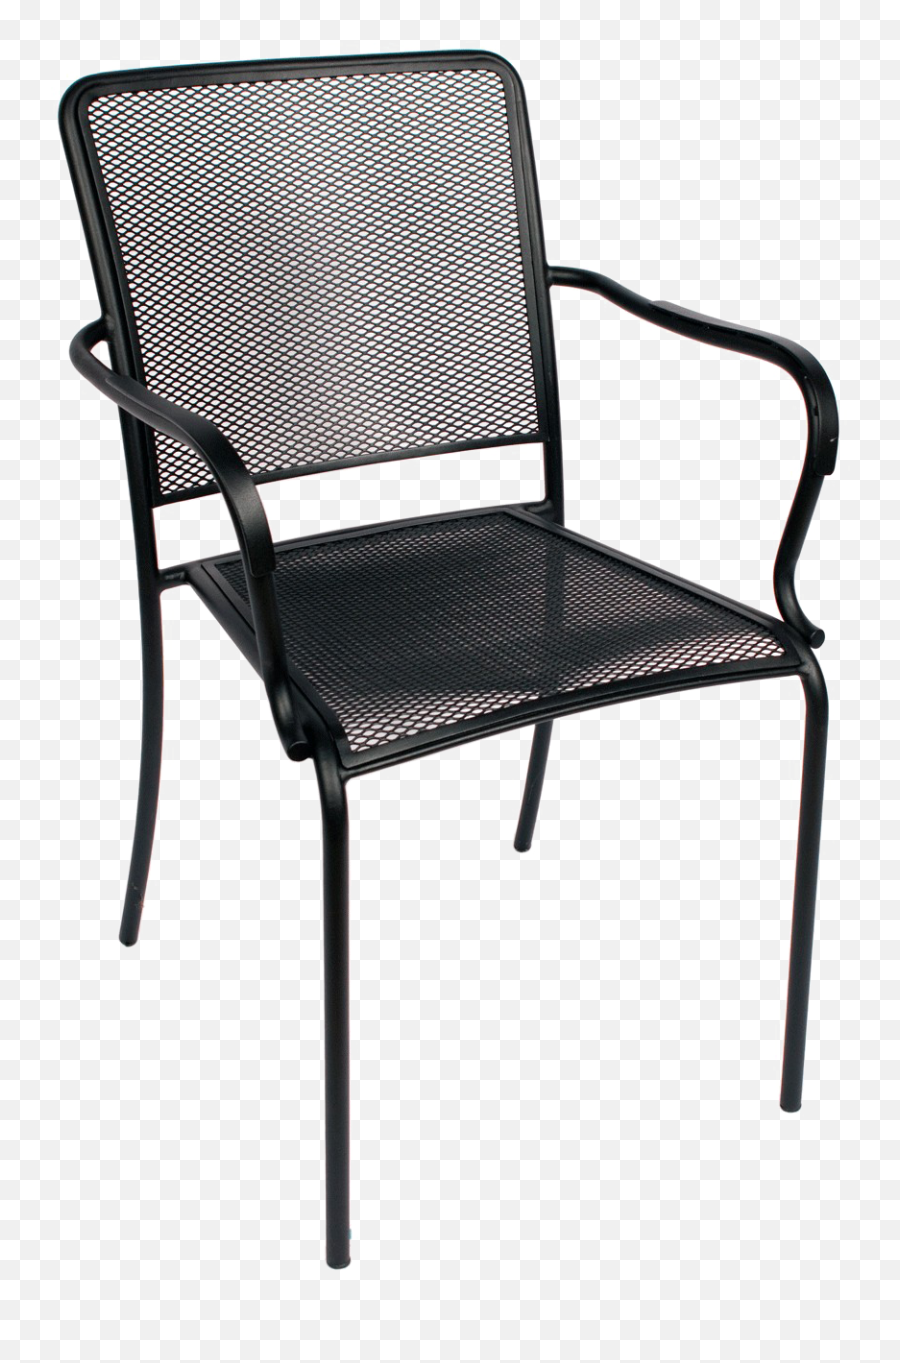 Patio Chair Png Photos - Lawn Chair Png,Lawn Chair Png